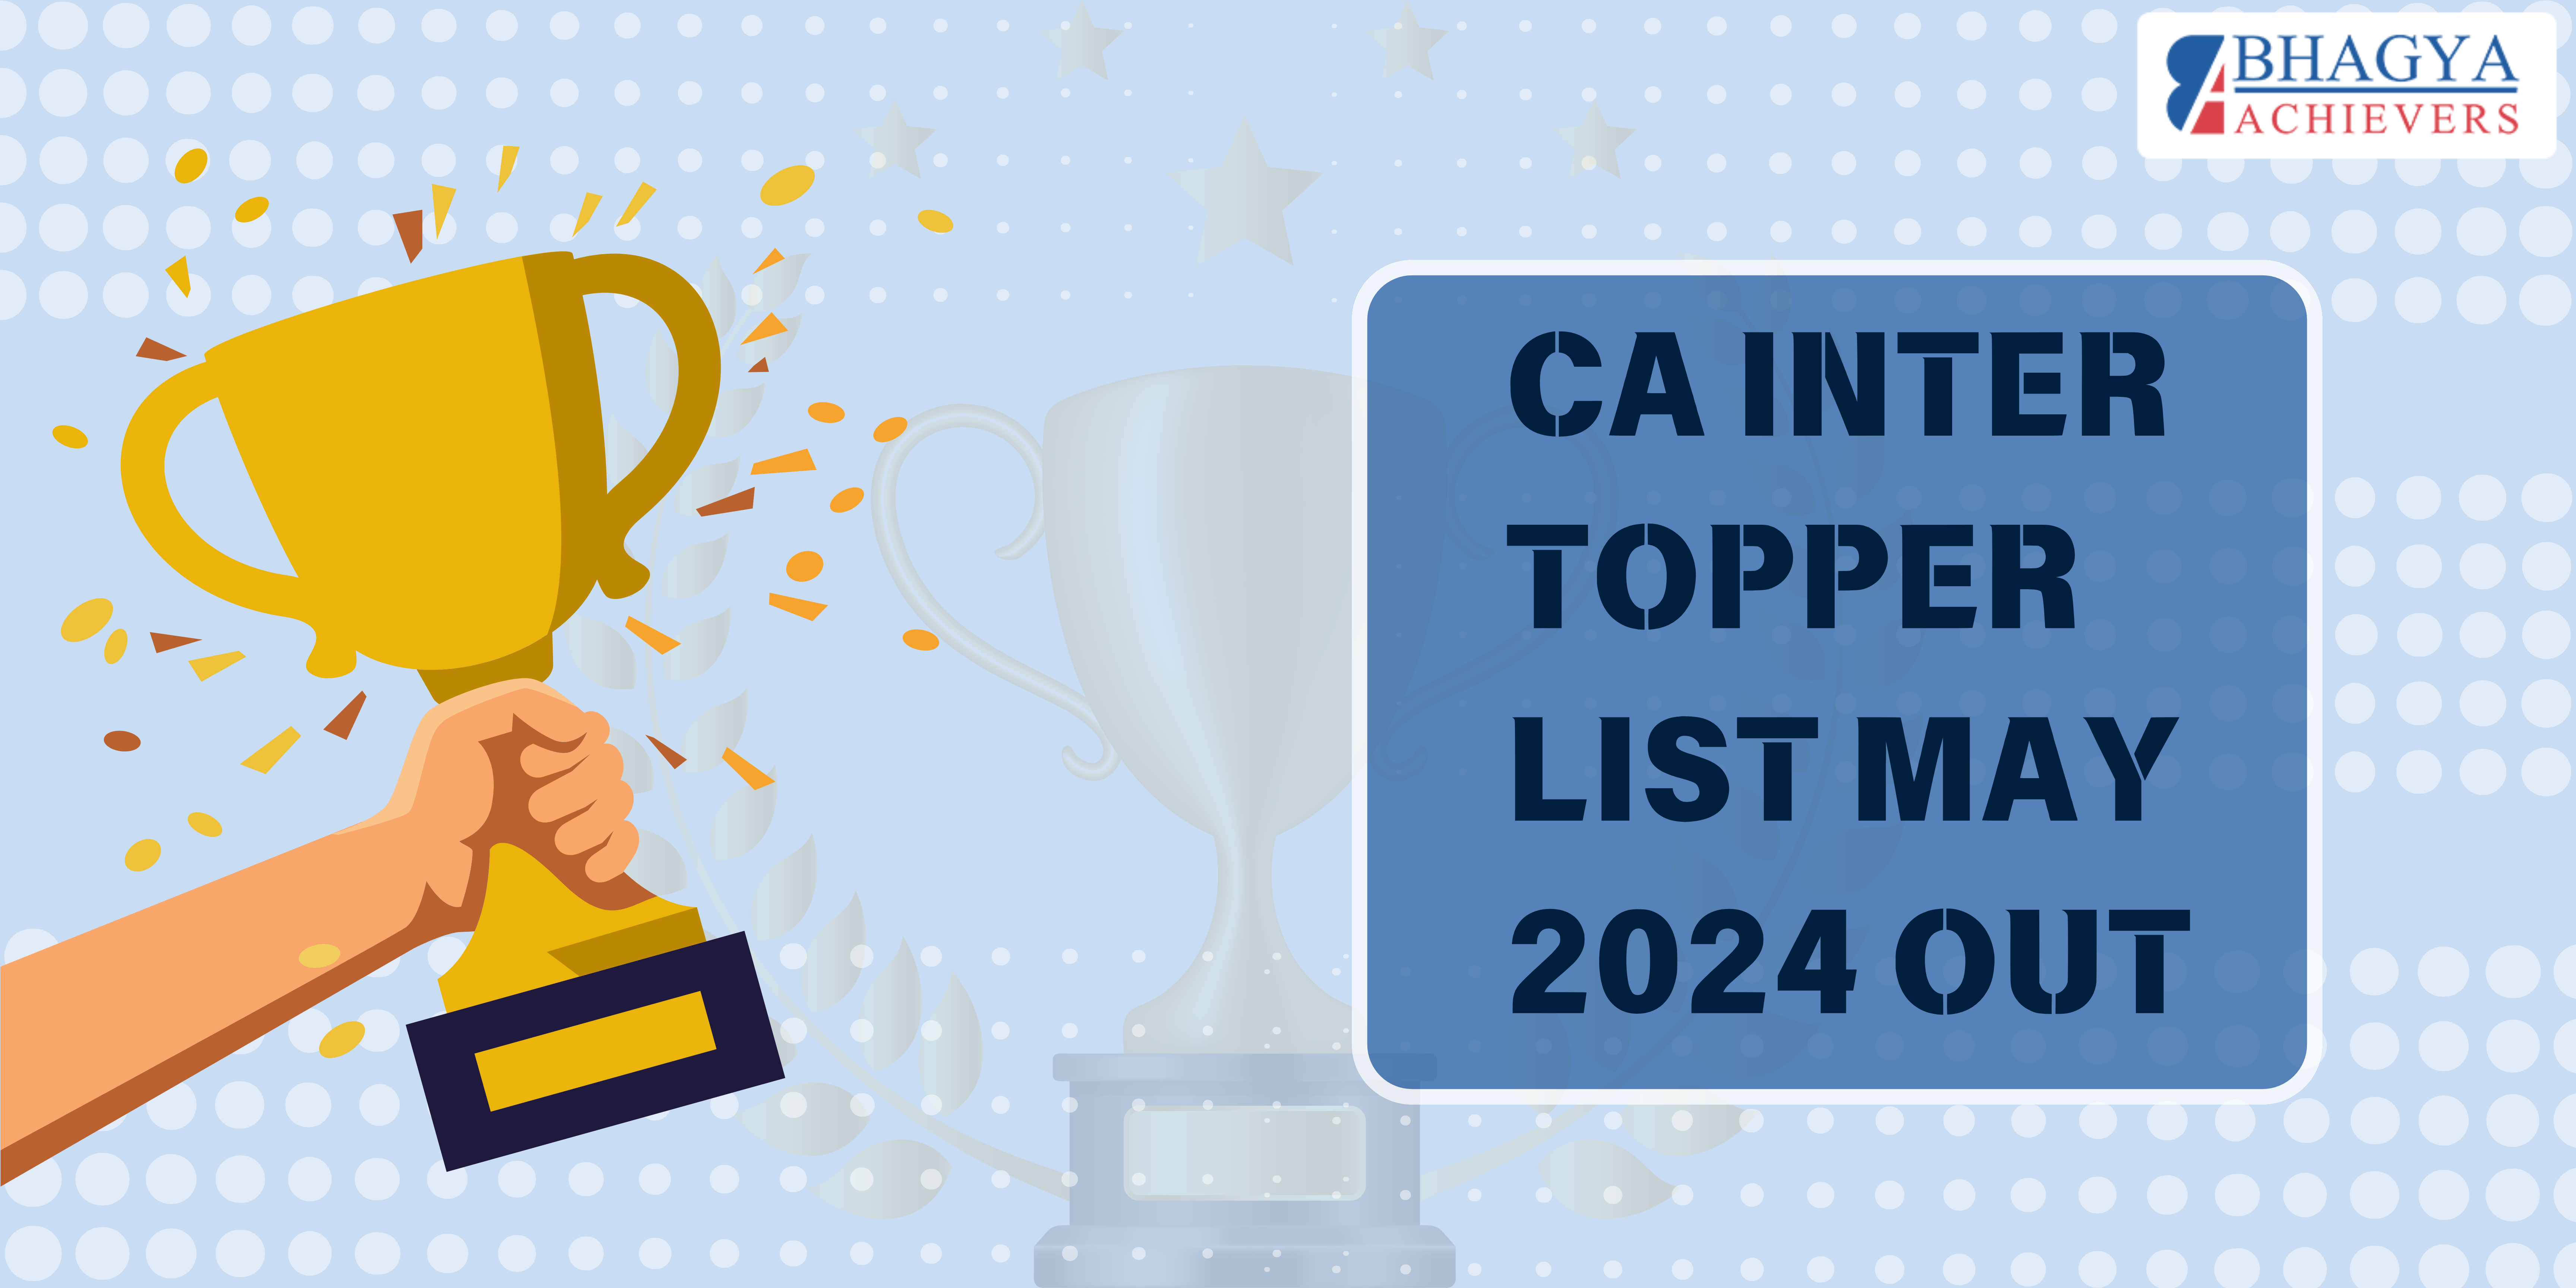 CA Inter Topper List May 2024 out - Bhagya Achievers